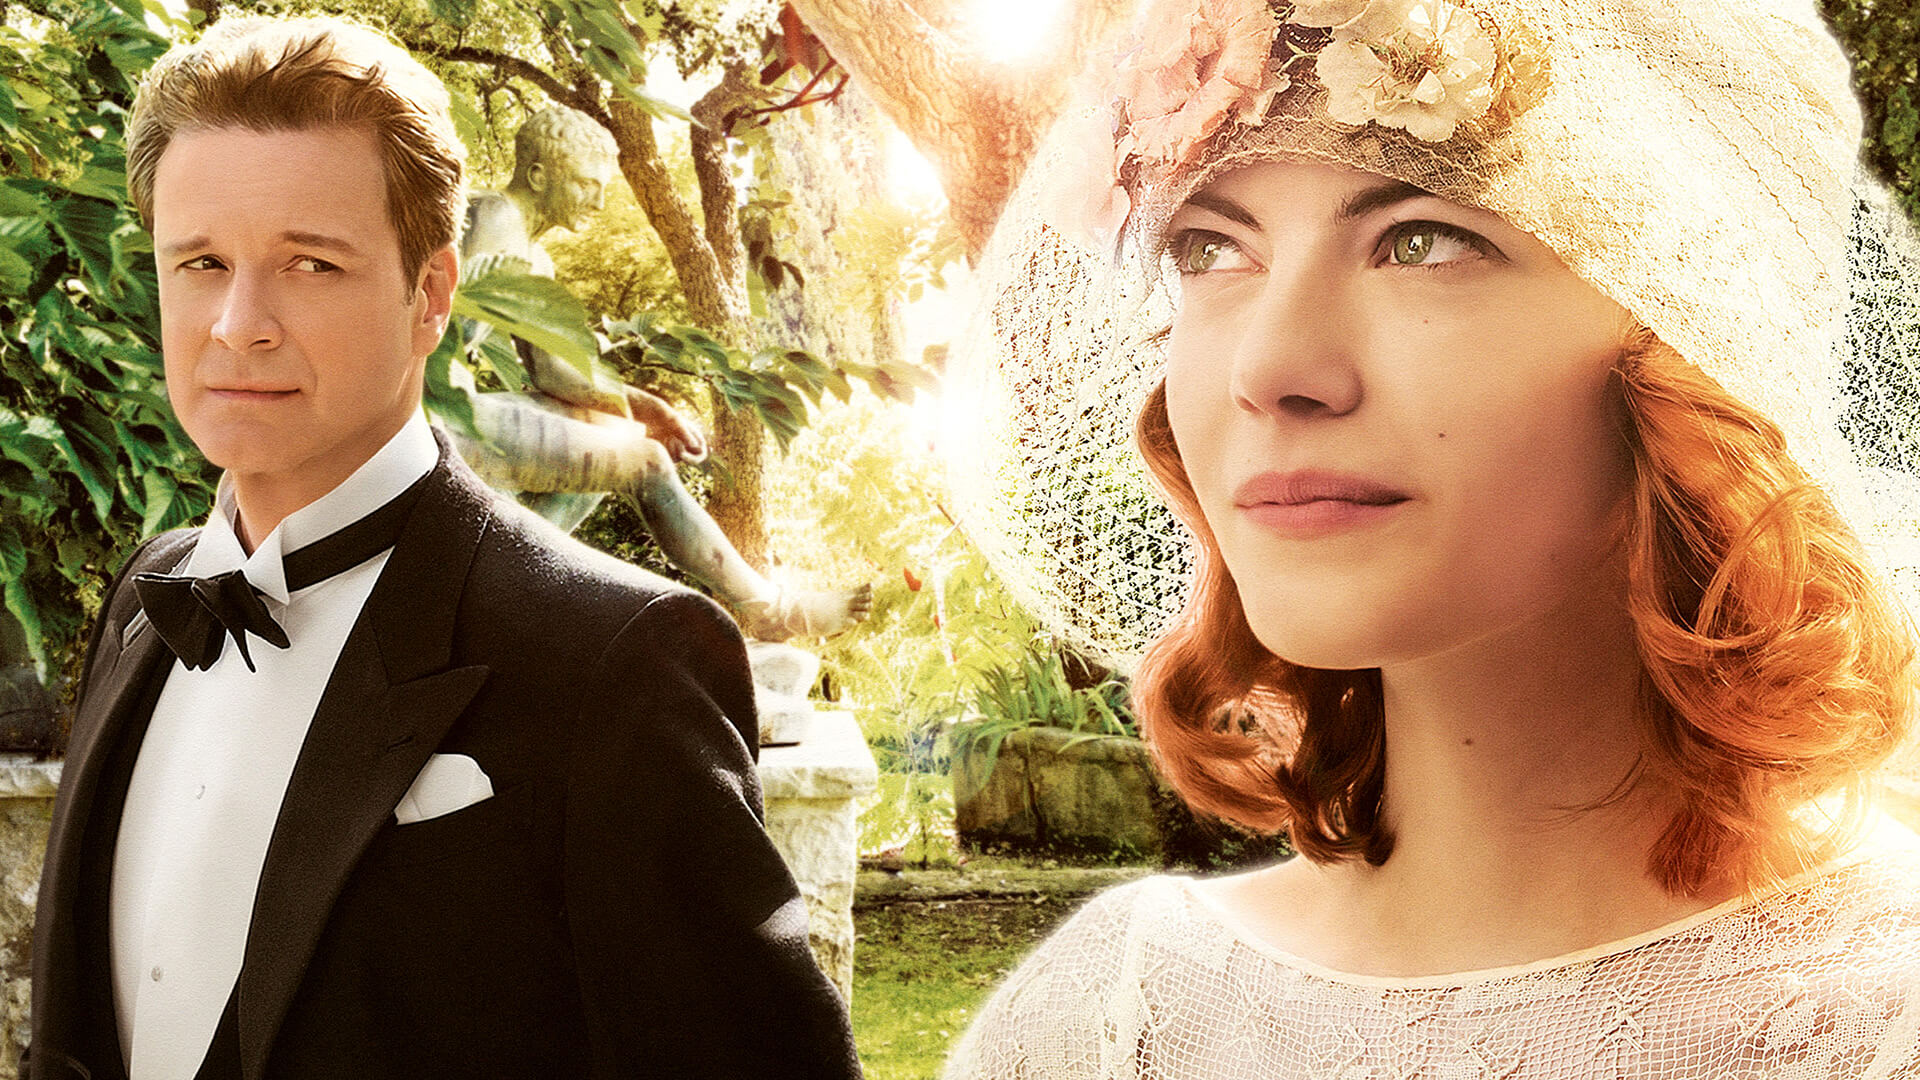 Movie Magic In The Moonlight HD Wallpaper Background Image. 